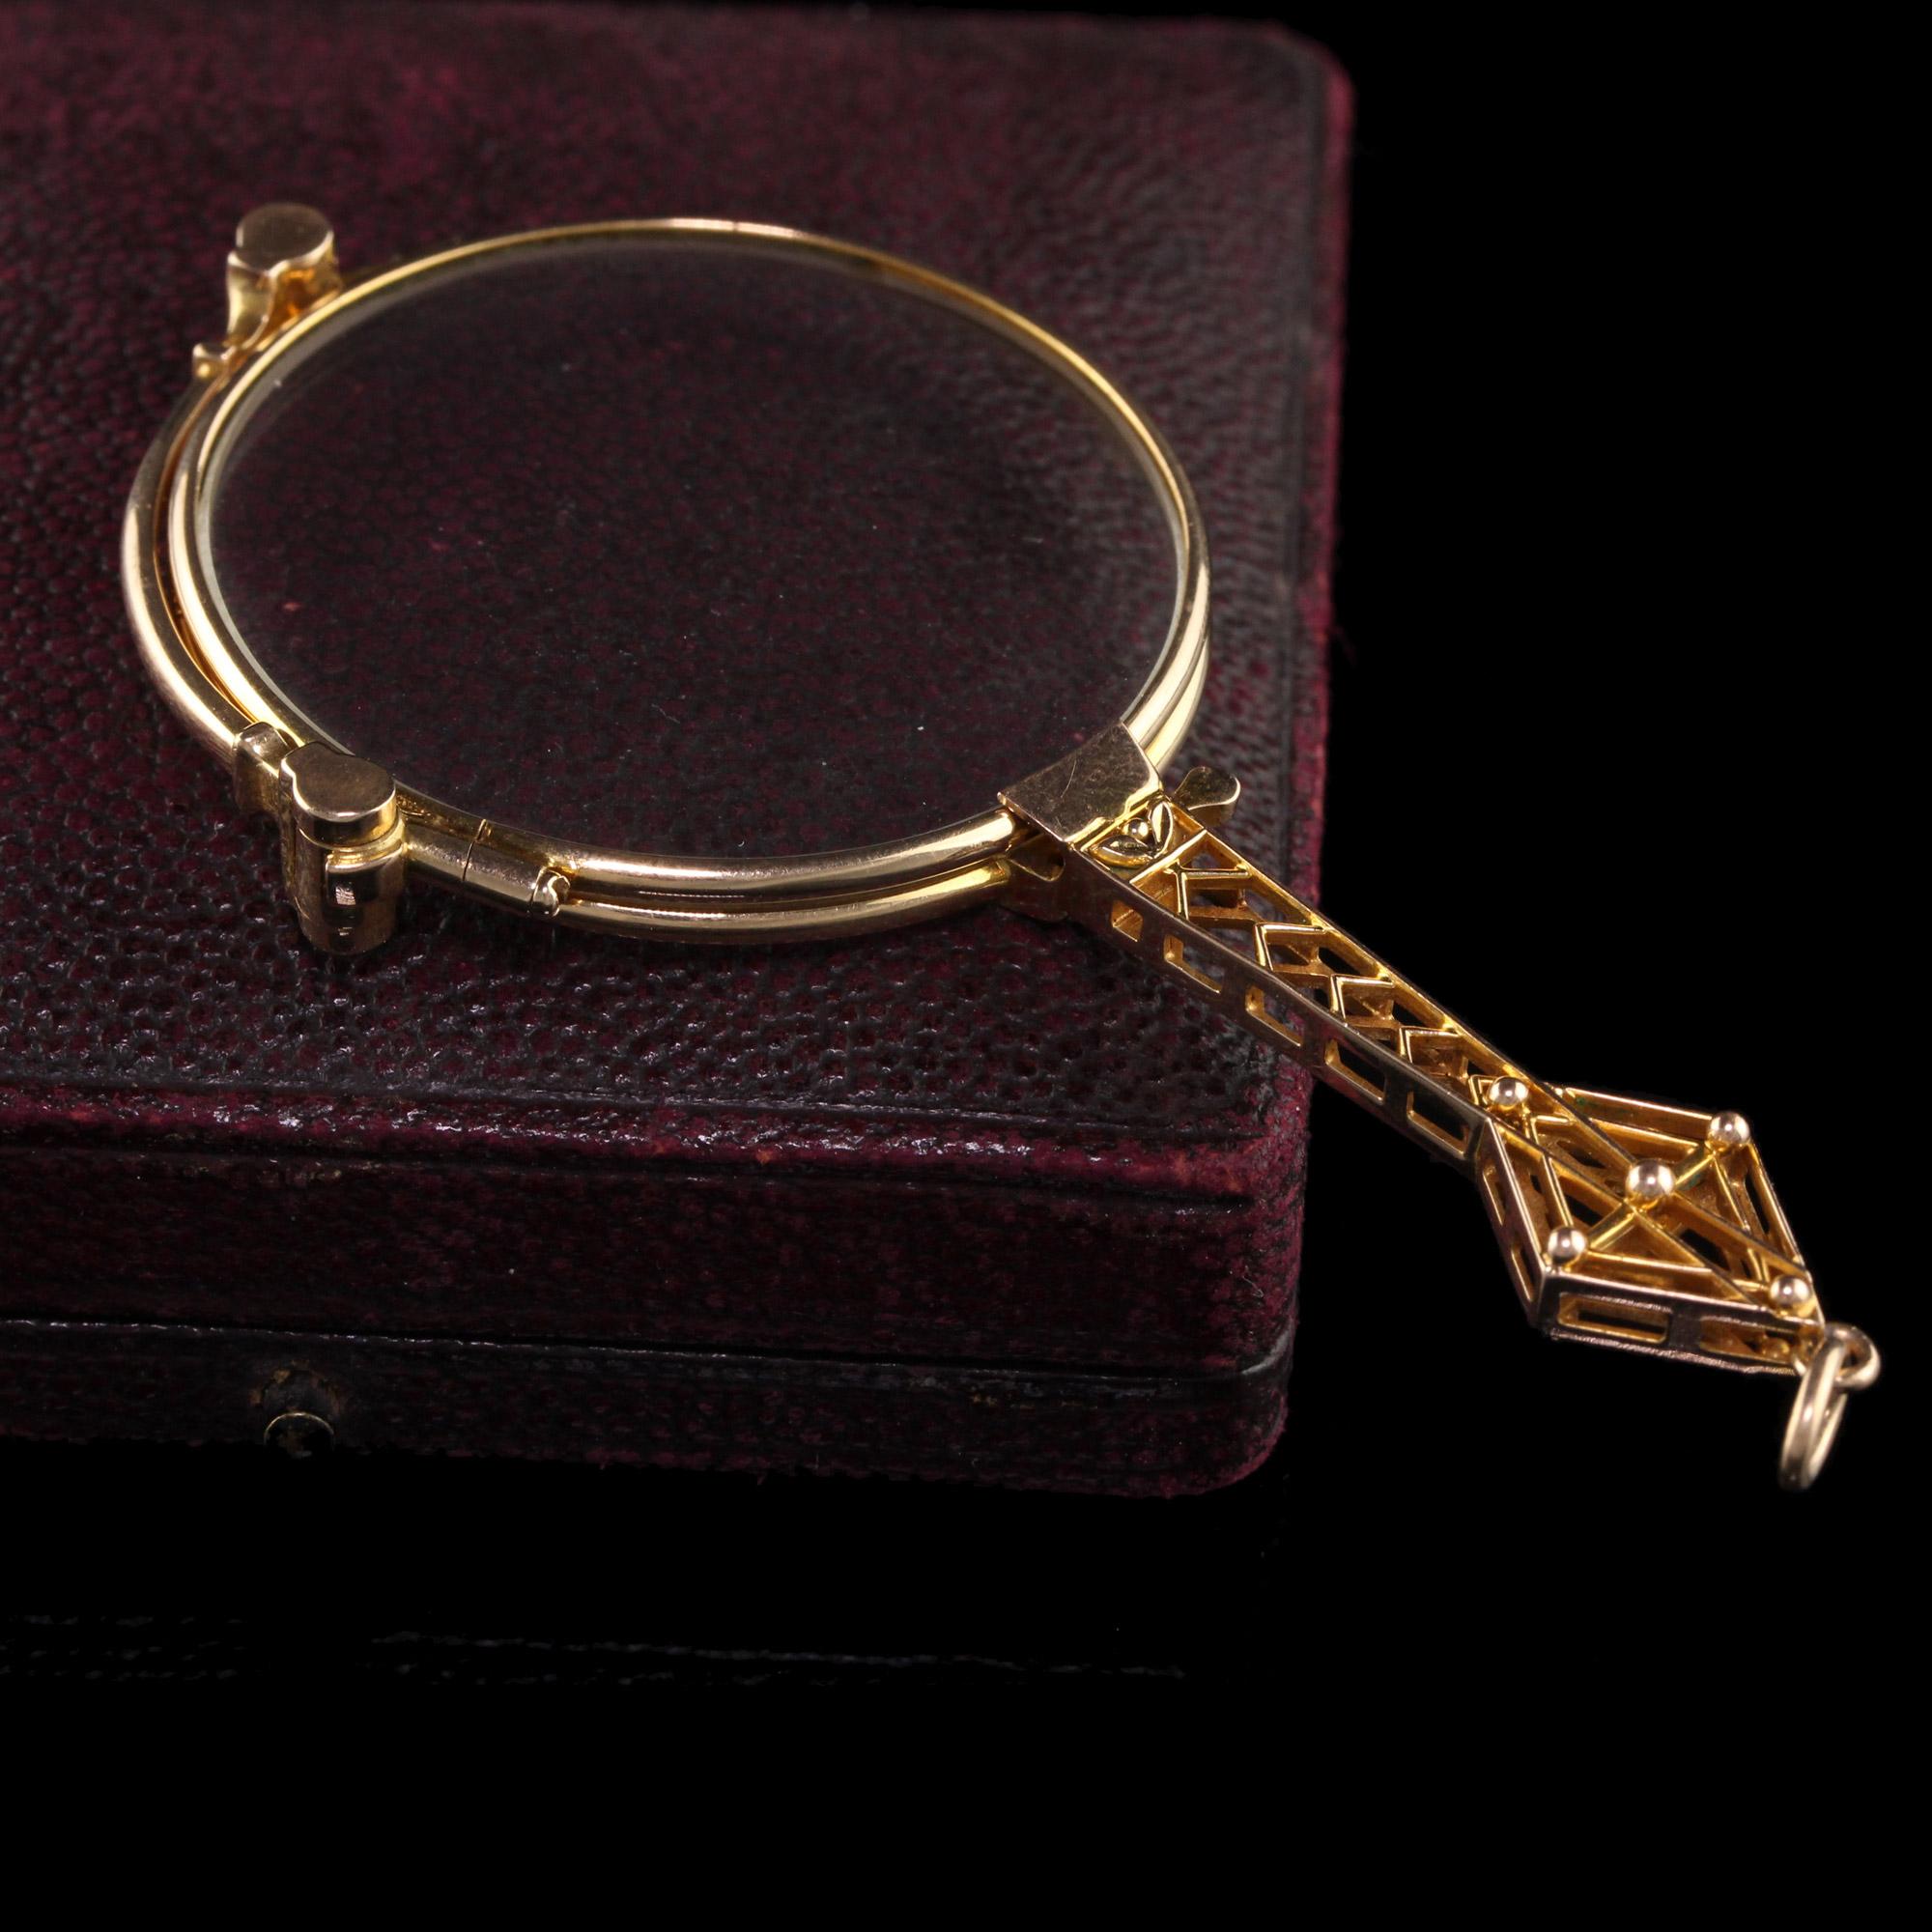 Gorgeous 14K Yellow Gold Art Deco Filigree Lorgnette Glasses. This beautiful piece is in amazing condition and has actual magnified lenses on it. It opens and closes well and would look great as a pendant.

Item #MISC0001

Metal: 14K Yellow